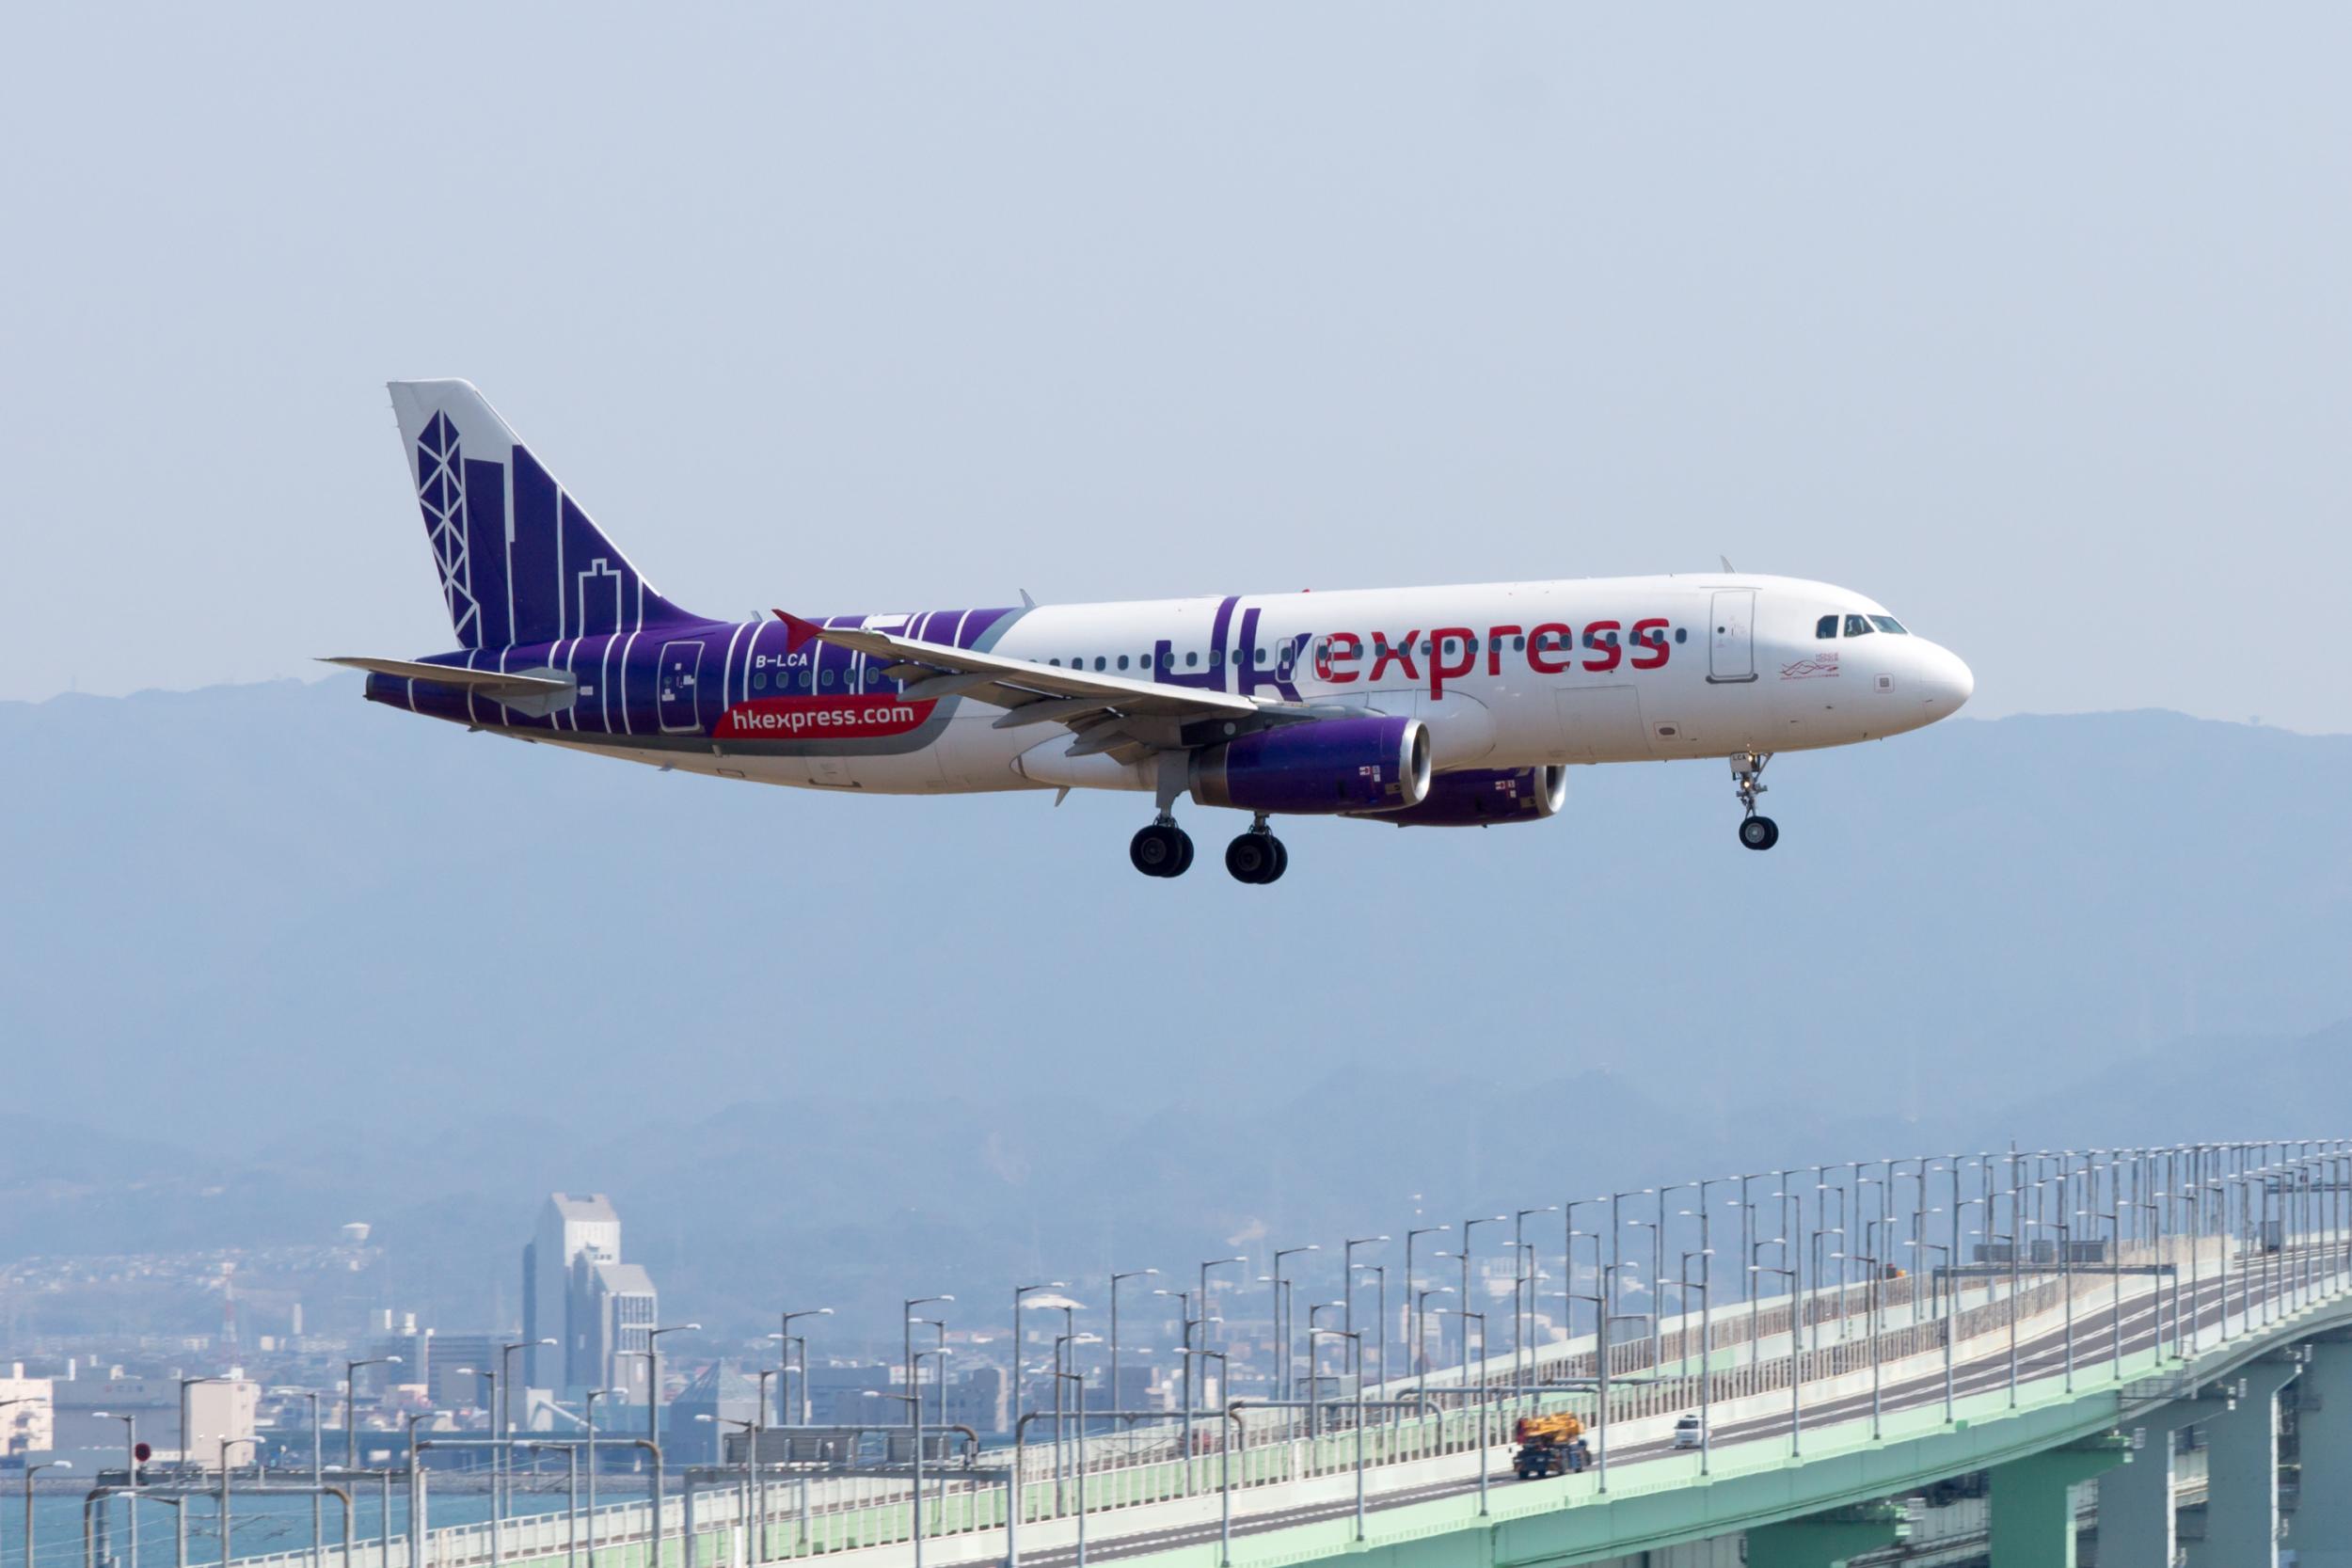 Hong Kong Express said it 'would like to apologise unreservedly'